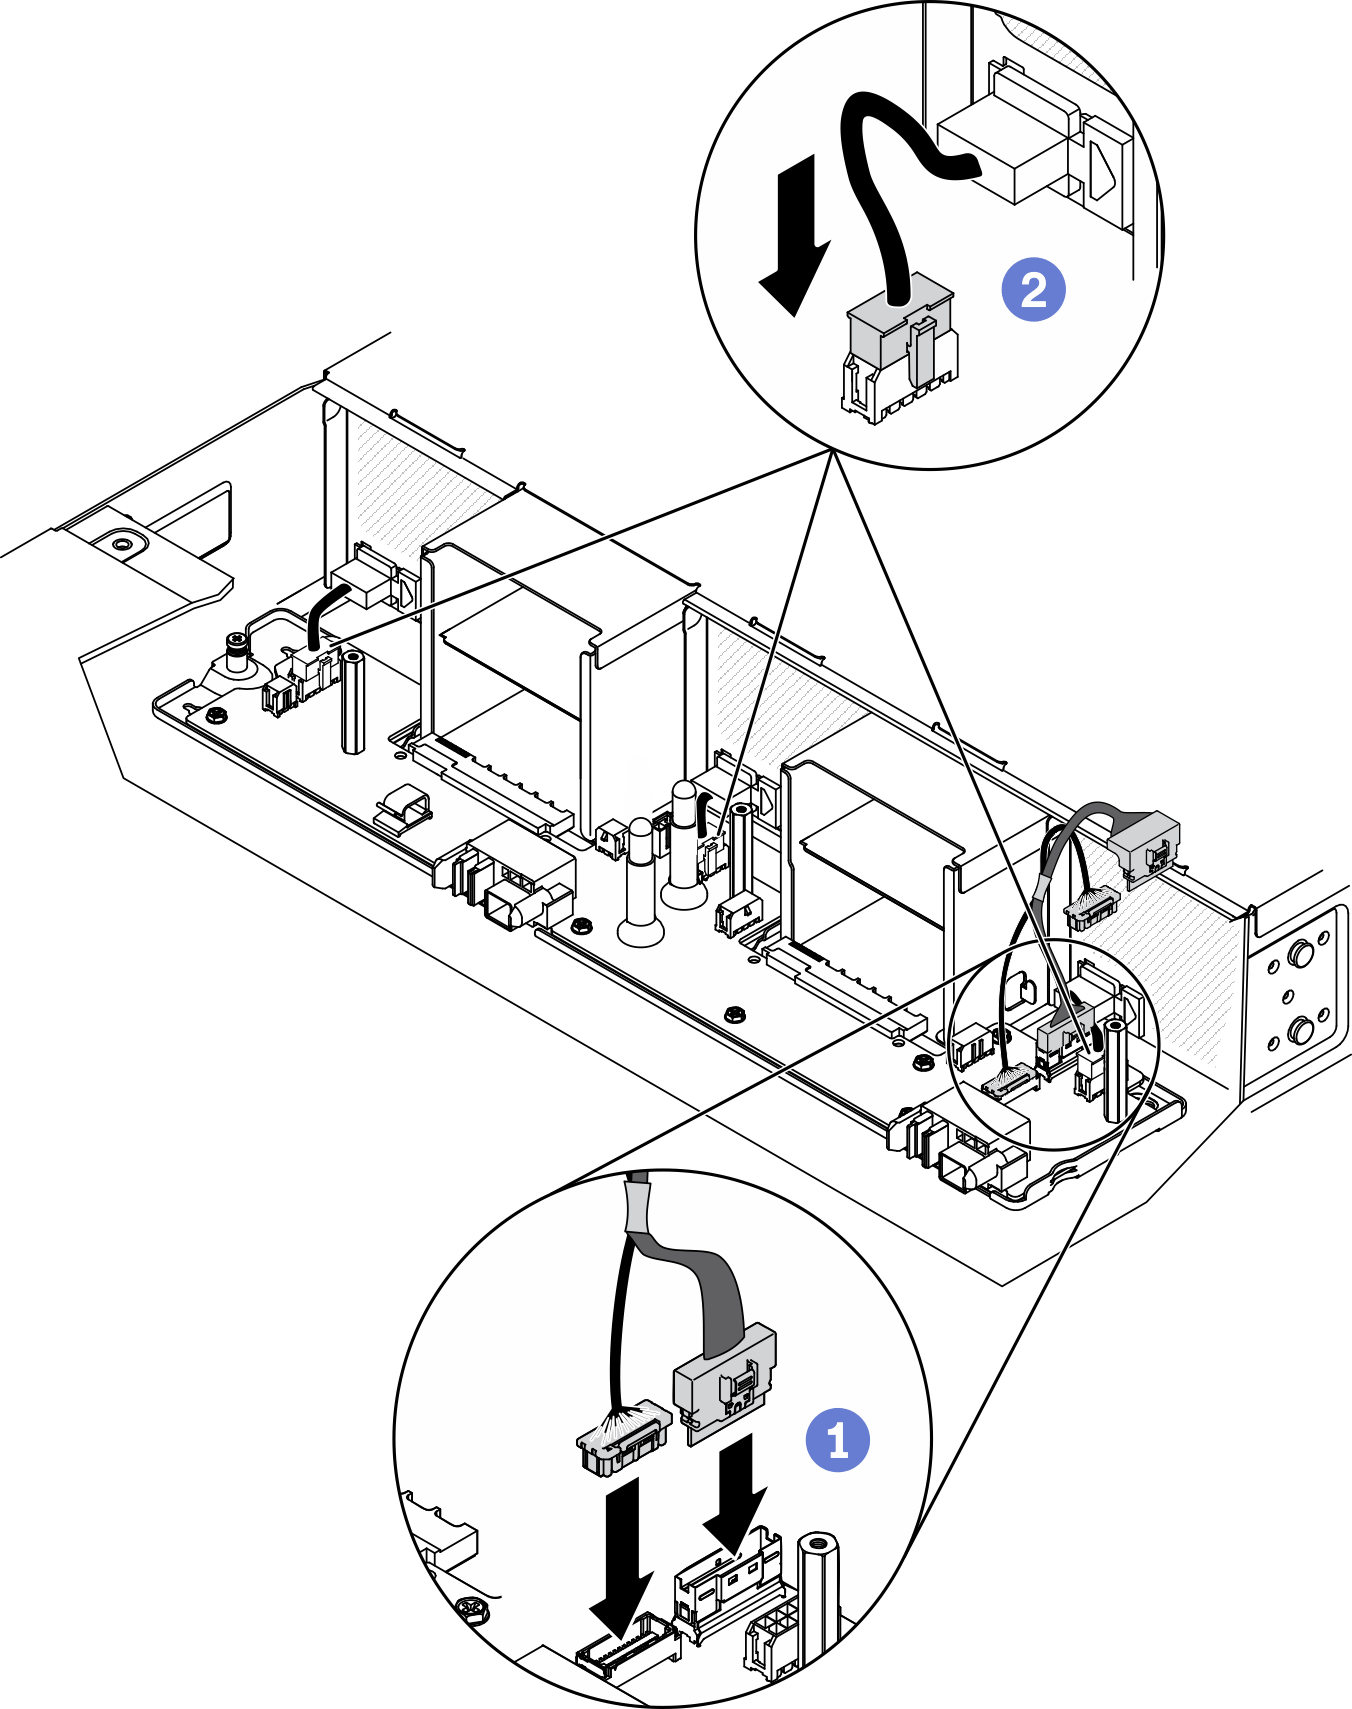 Connecting the fan cables and the interconnect cables for power distribution boards